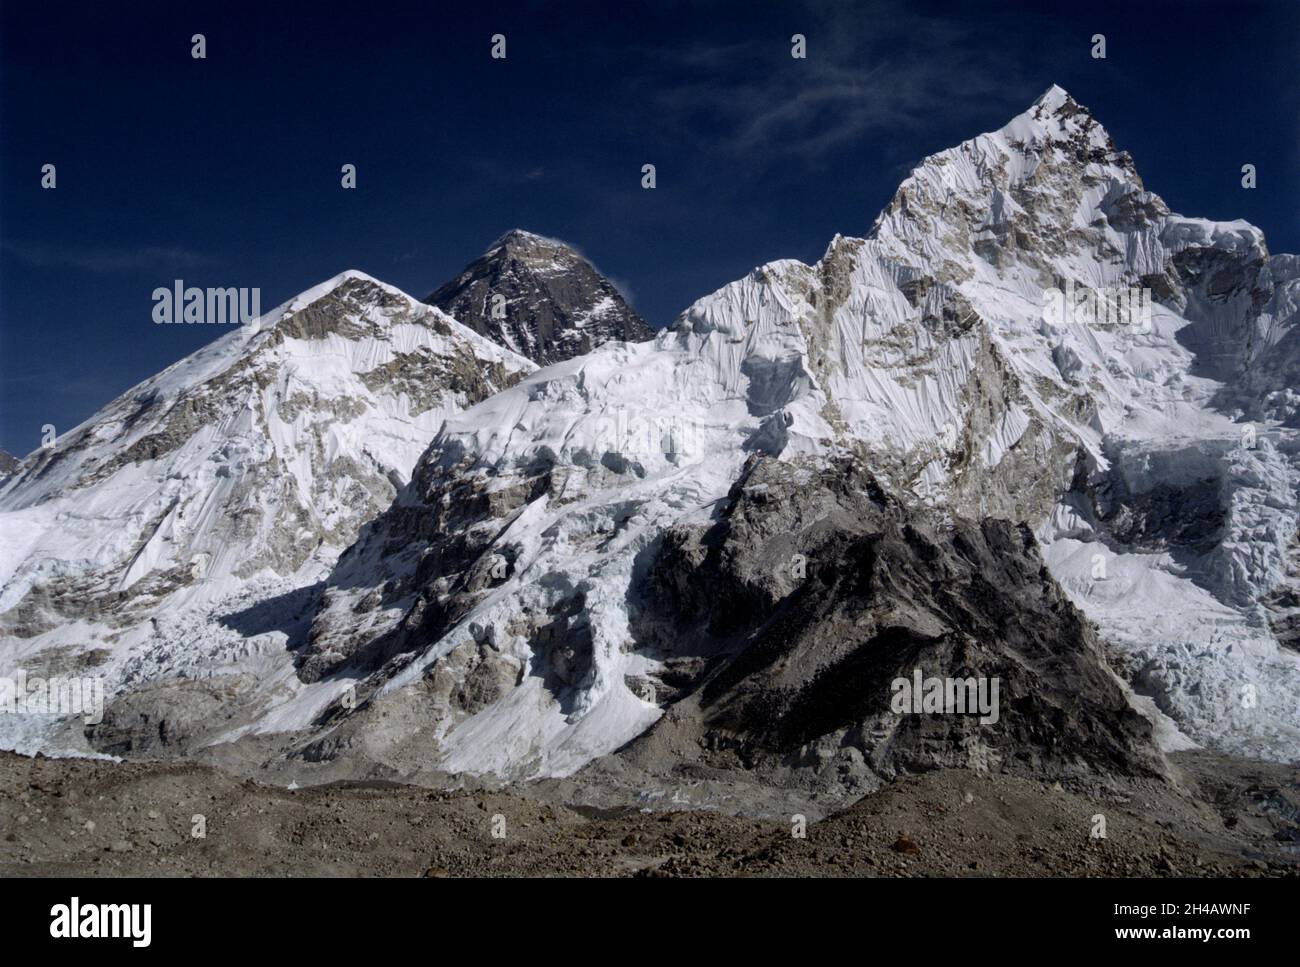 MOUNT EVEREST, NEPAL - December 2005 - The summit of Mount Everest (dark peak centre-left) - the highest mountain in the world at 8848m - in the Evere Stock Photo